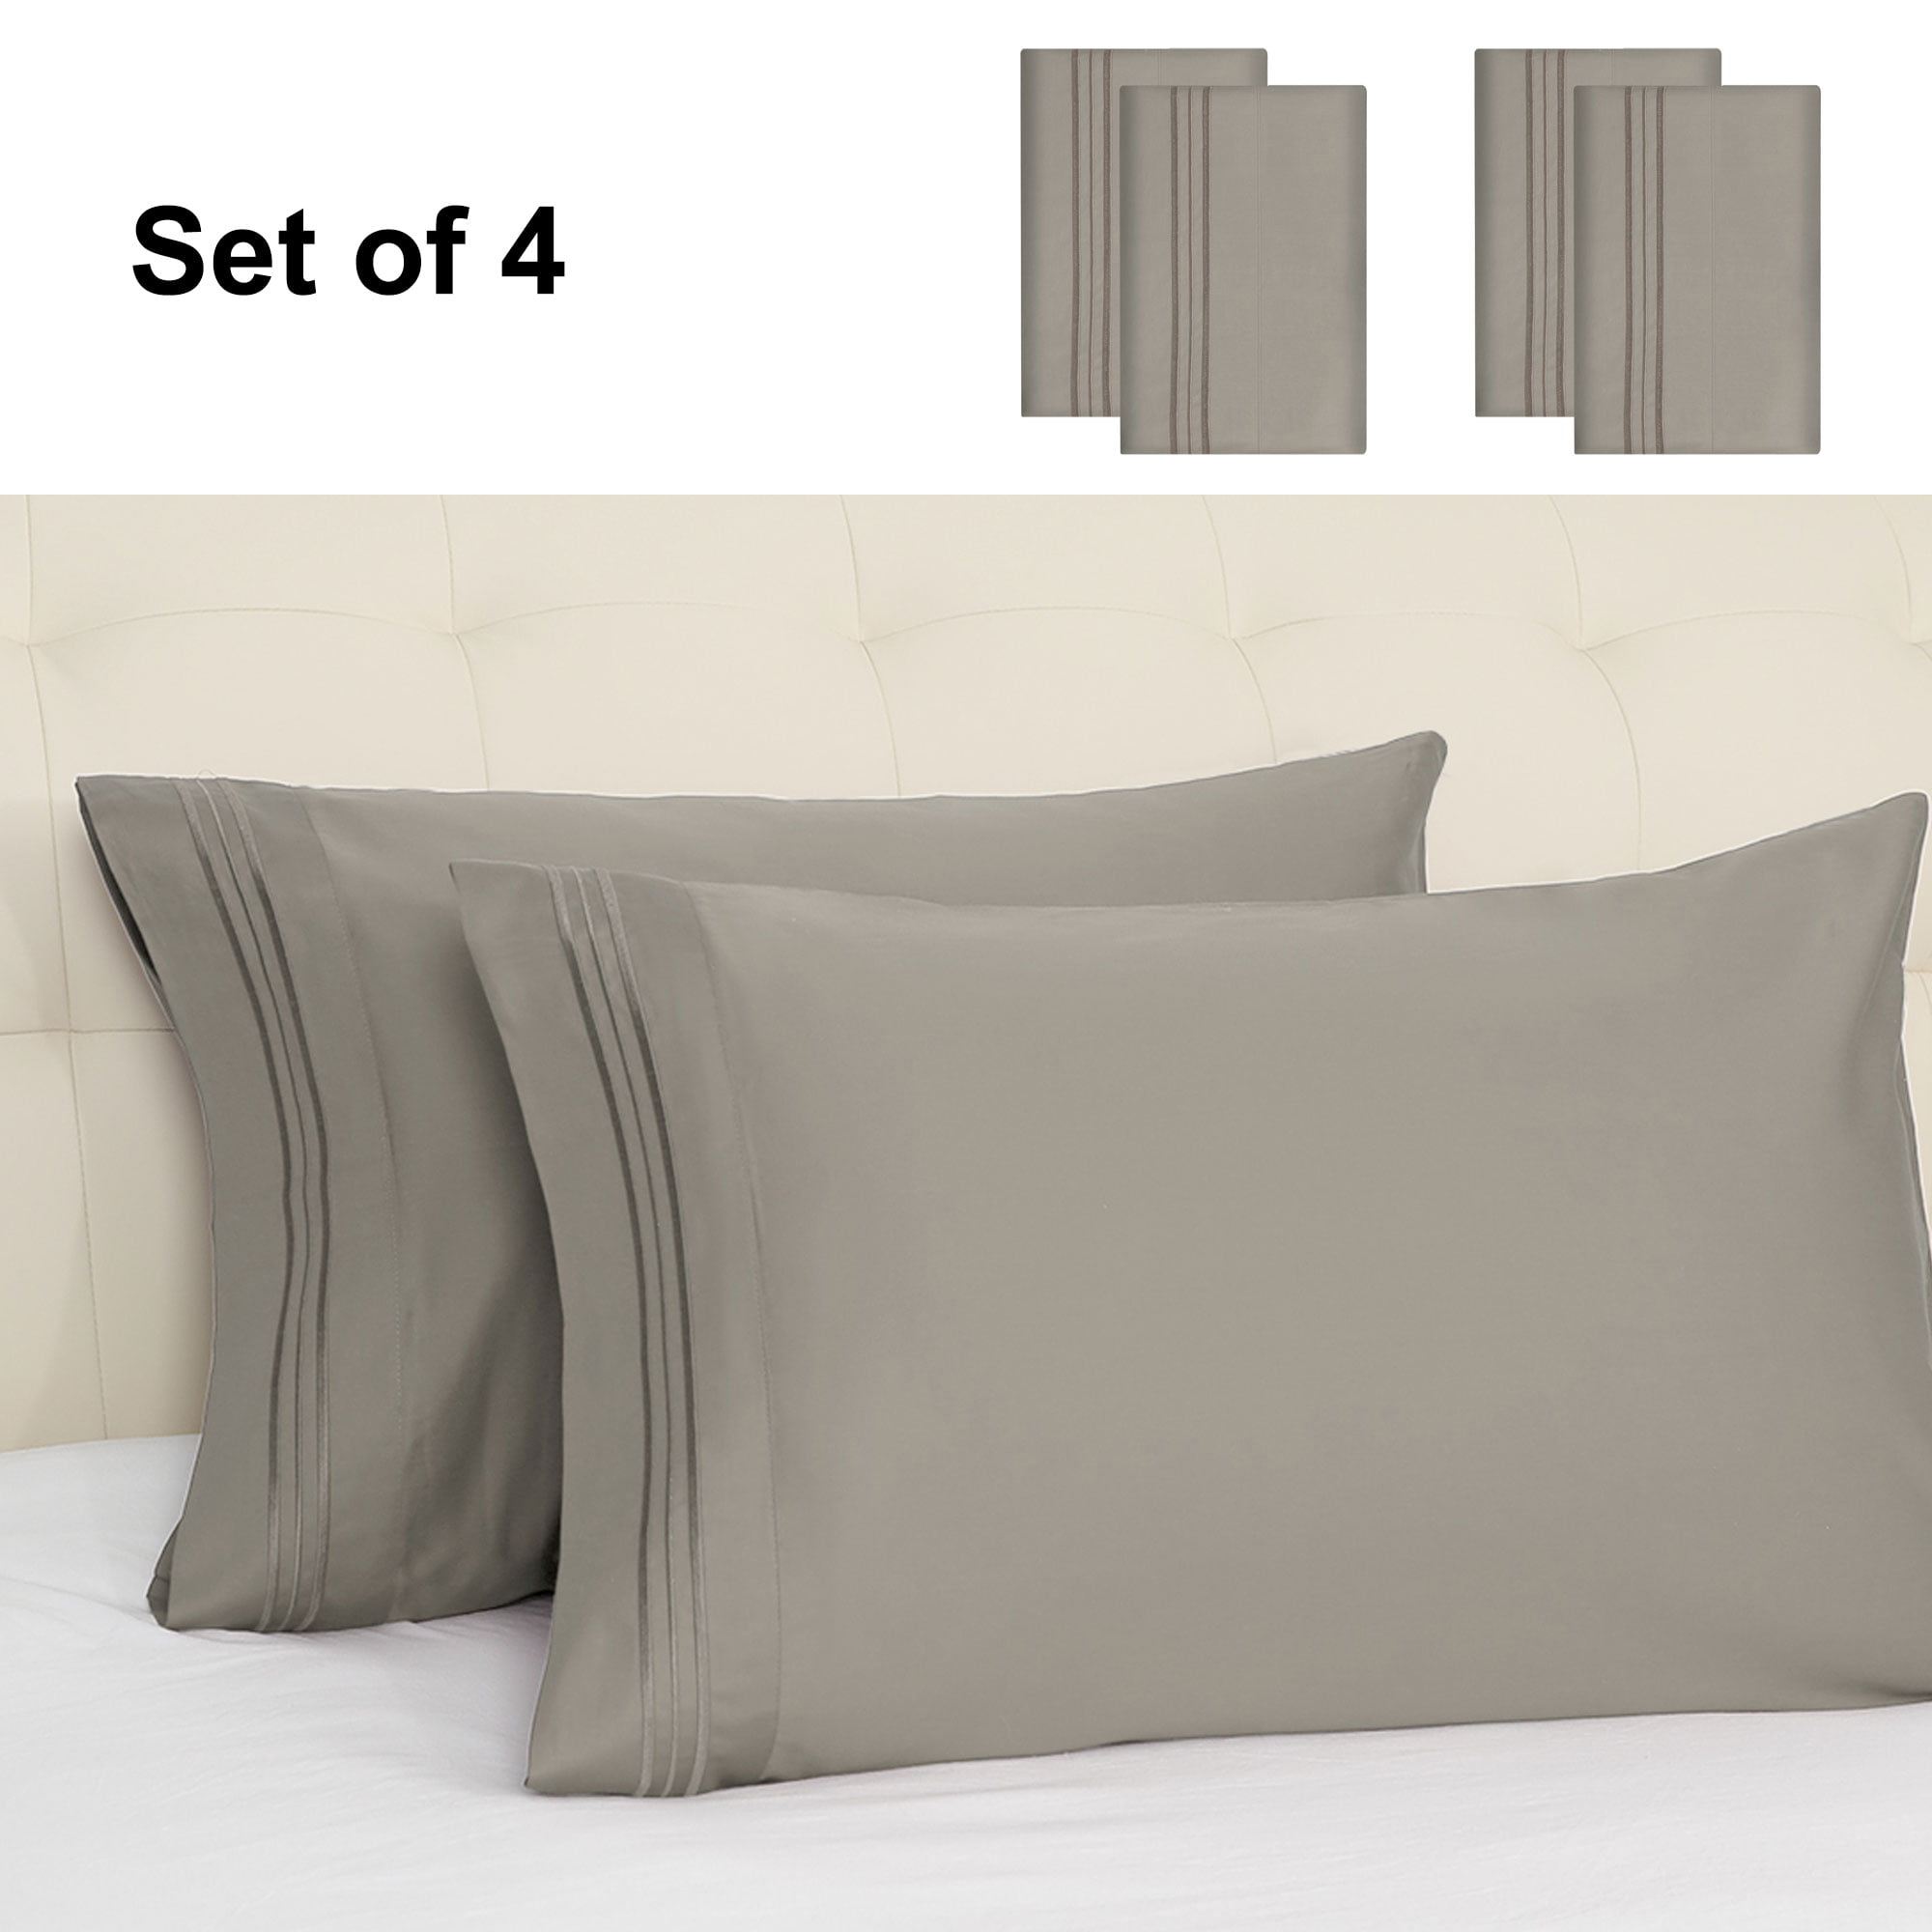 Reduces Allergies Details about   12 Piece Standard White Hotel Pillowcases,Maximum softness 